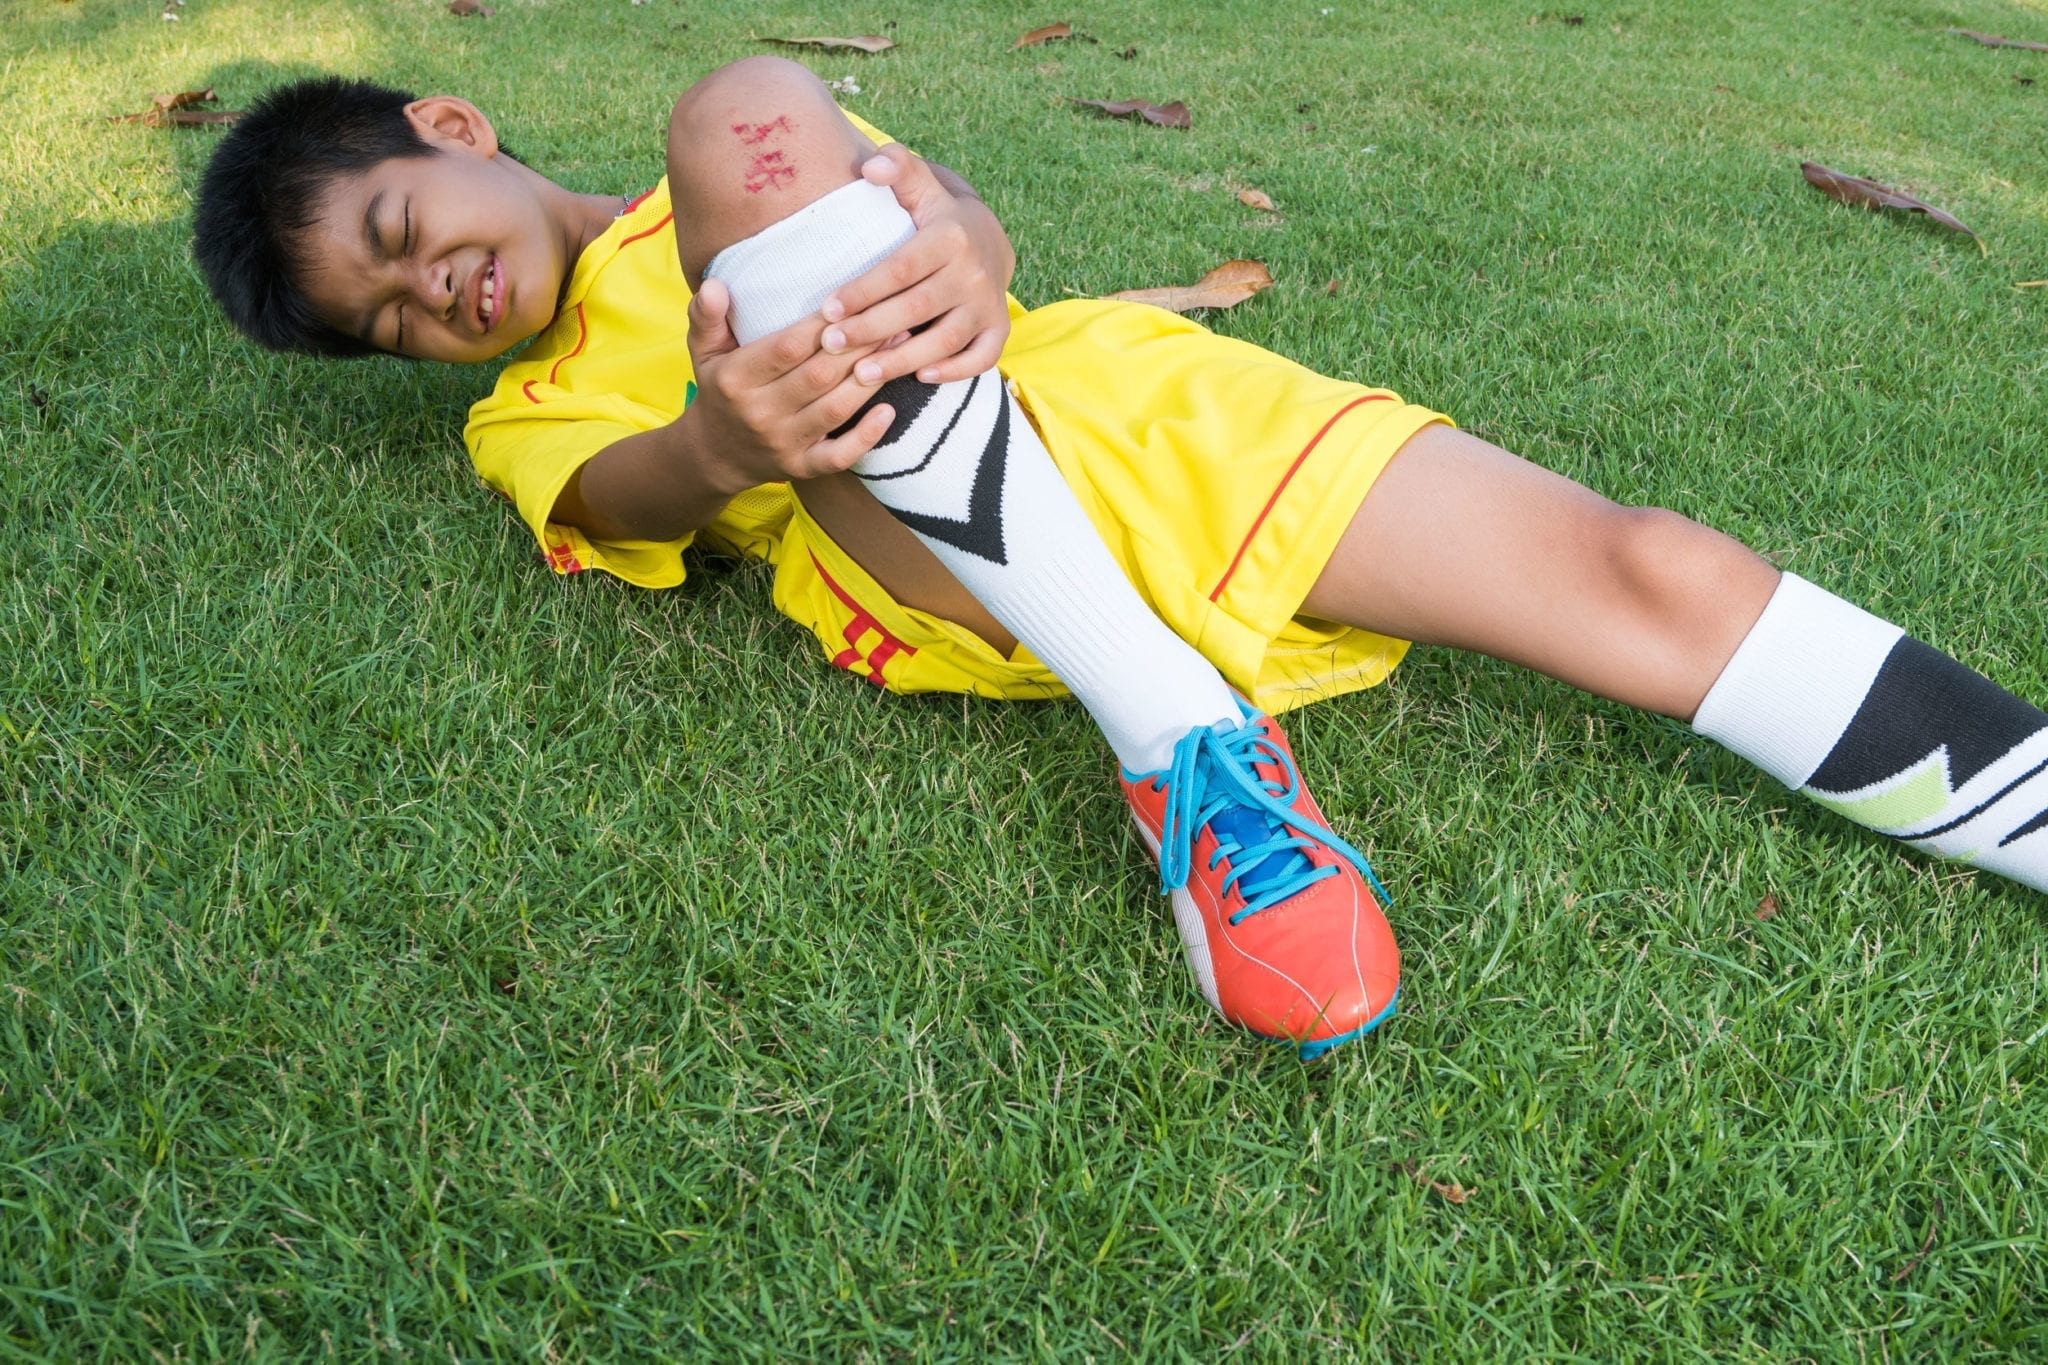 Everything Florida Parents Should Know about Kids’ Sports Injuries